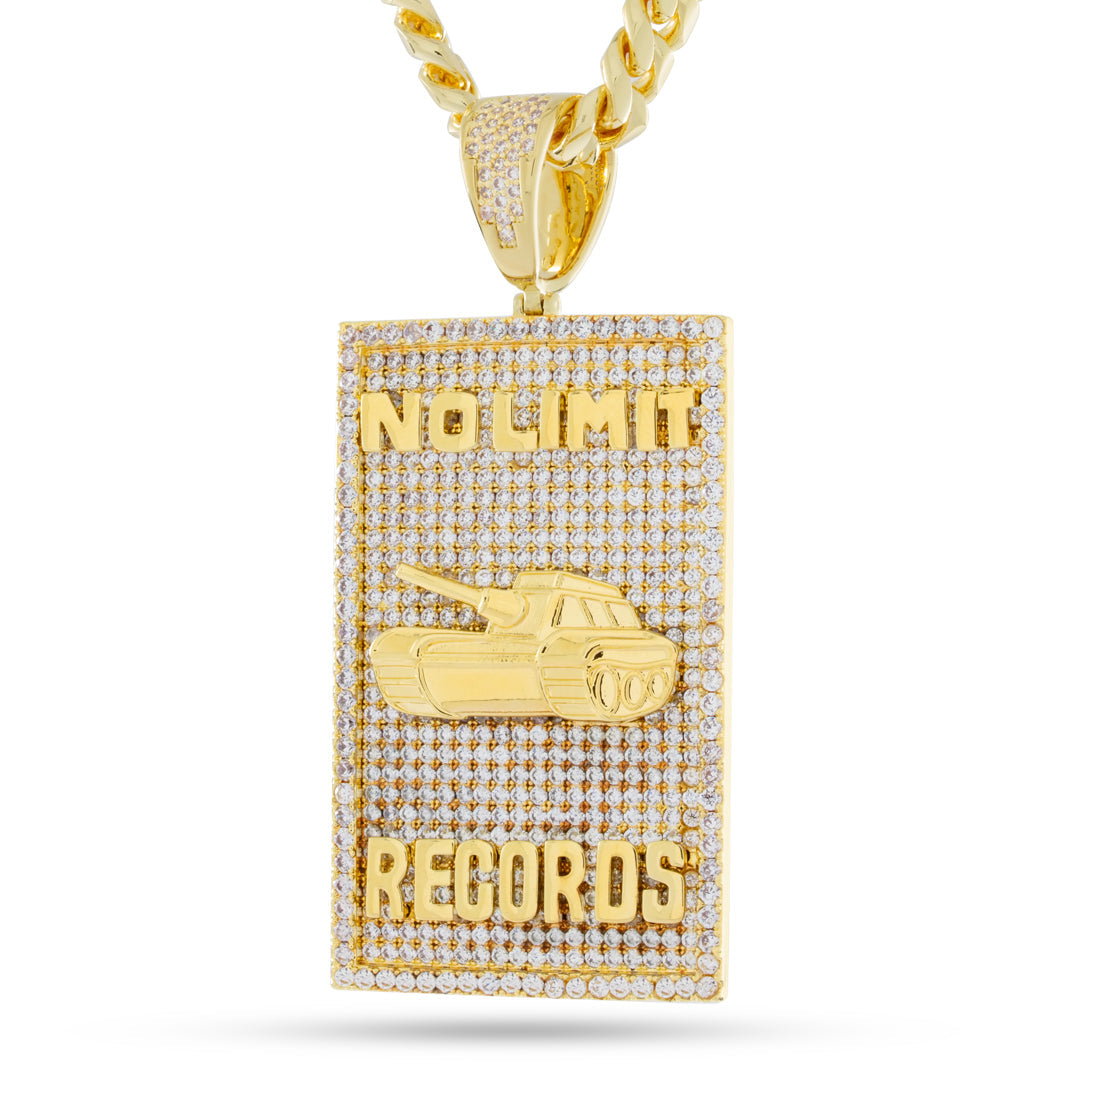 No Limit Records x King Ice - 98 Dynasty Dog Tag Necklace